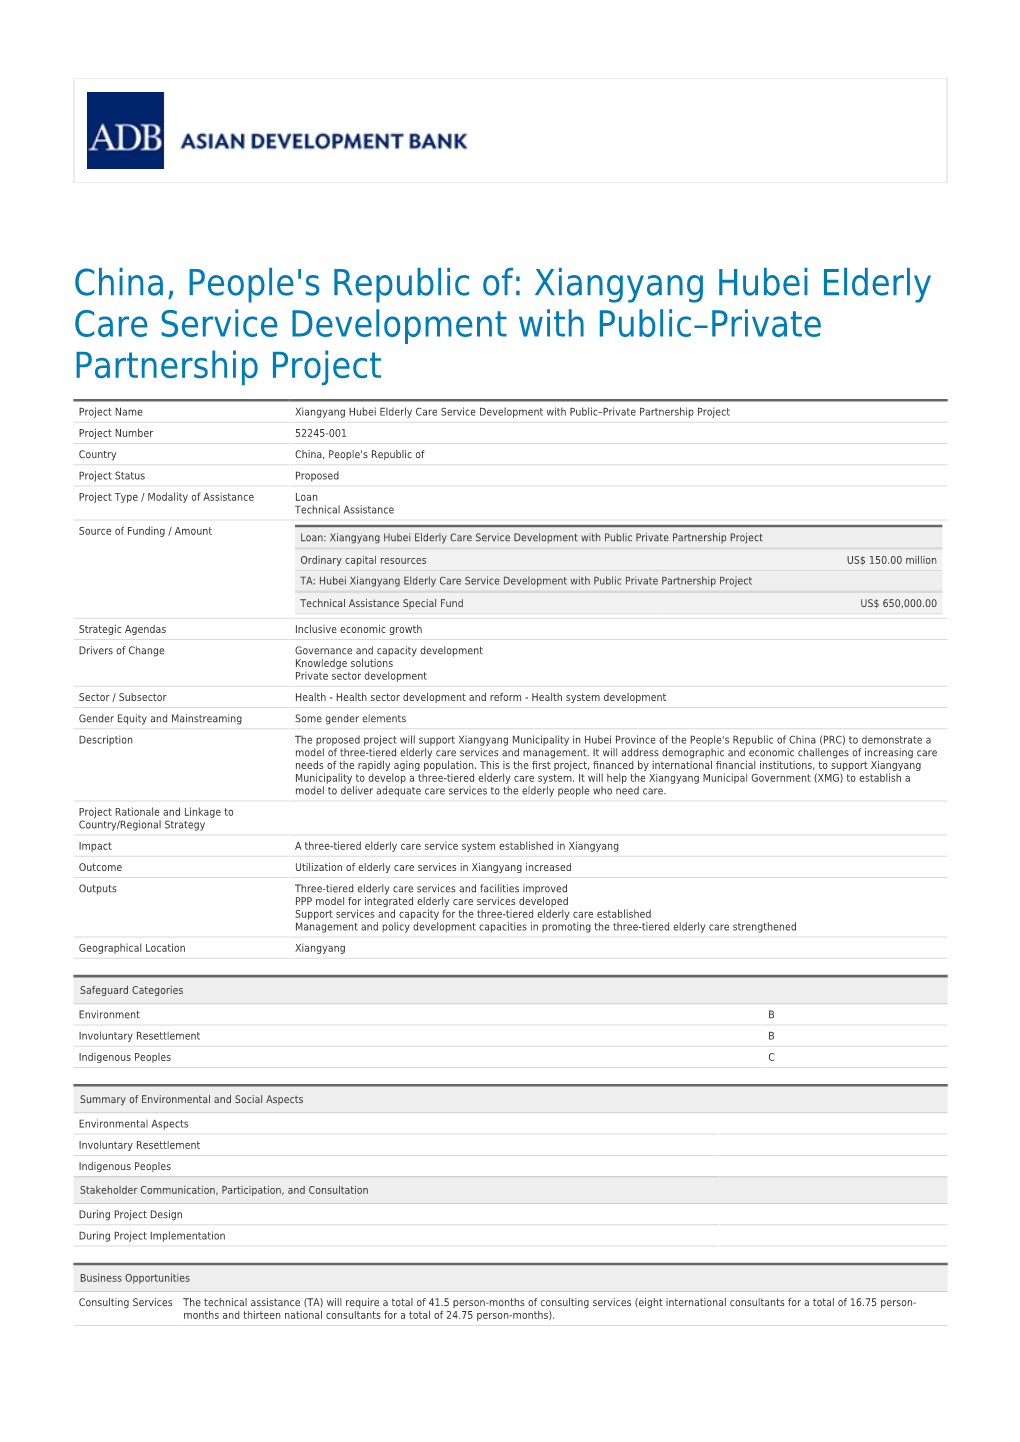 Xiangyang Hubei Elderly Care Service Development with Public–Private Partnership Project